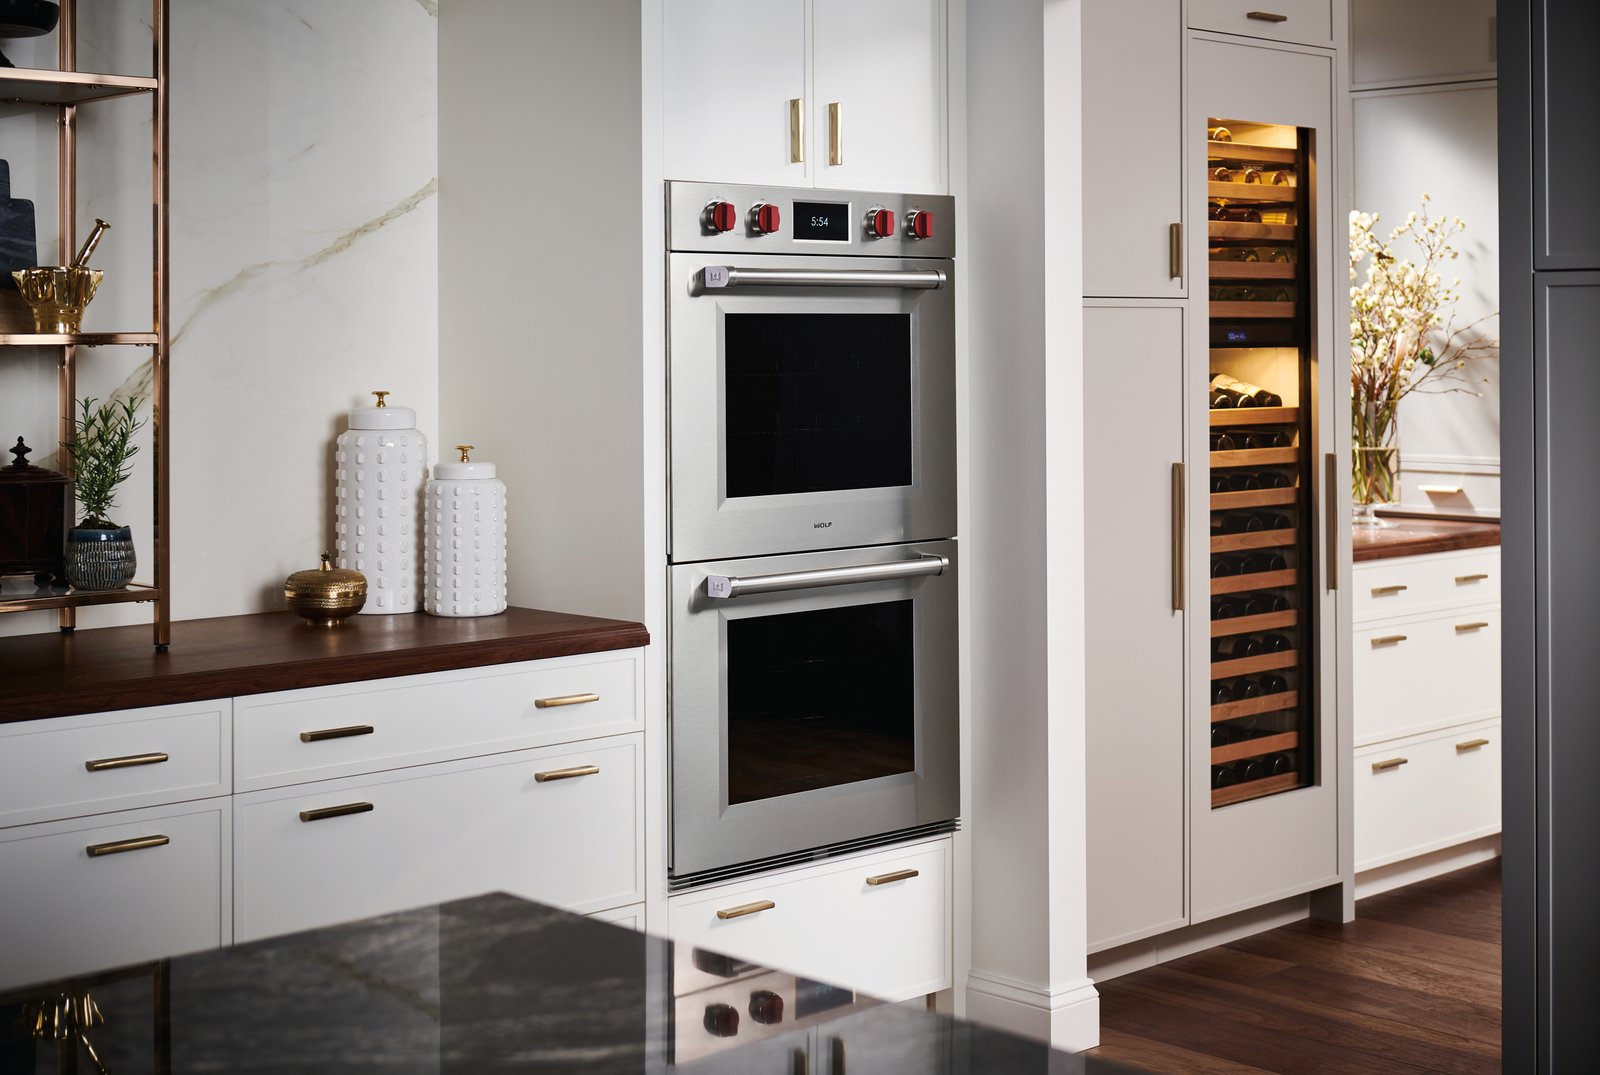 Built-in Ovens, Types and Installation